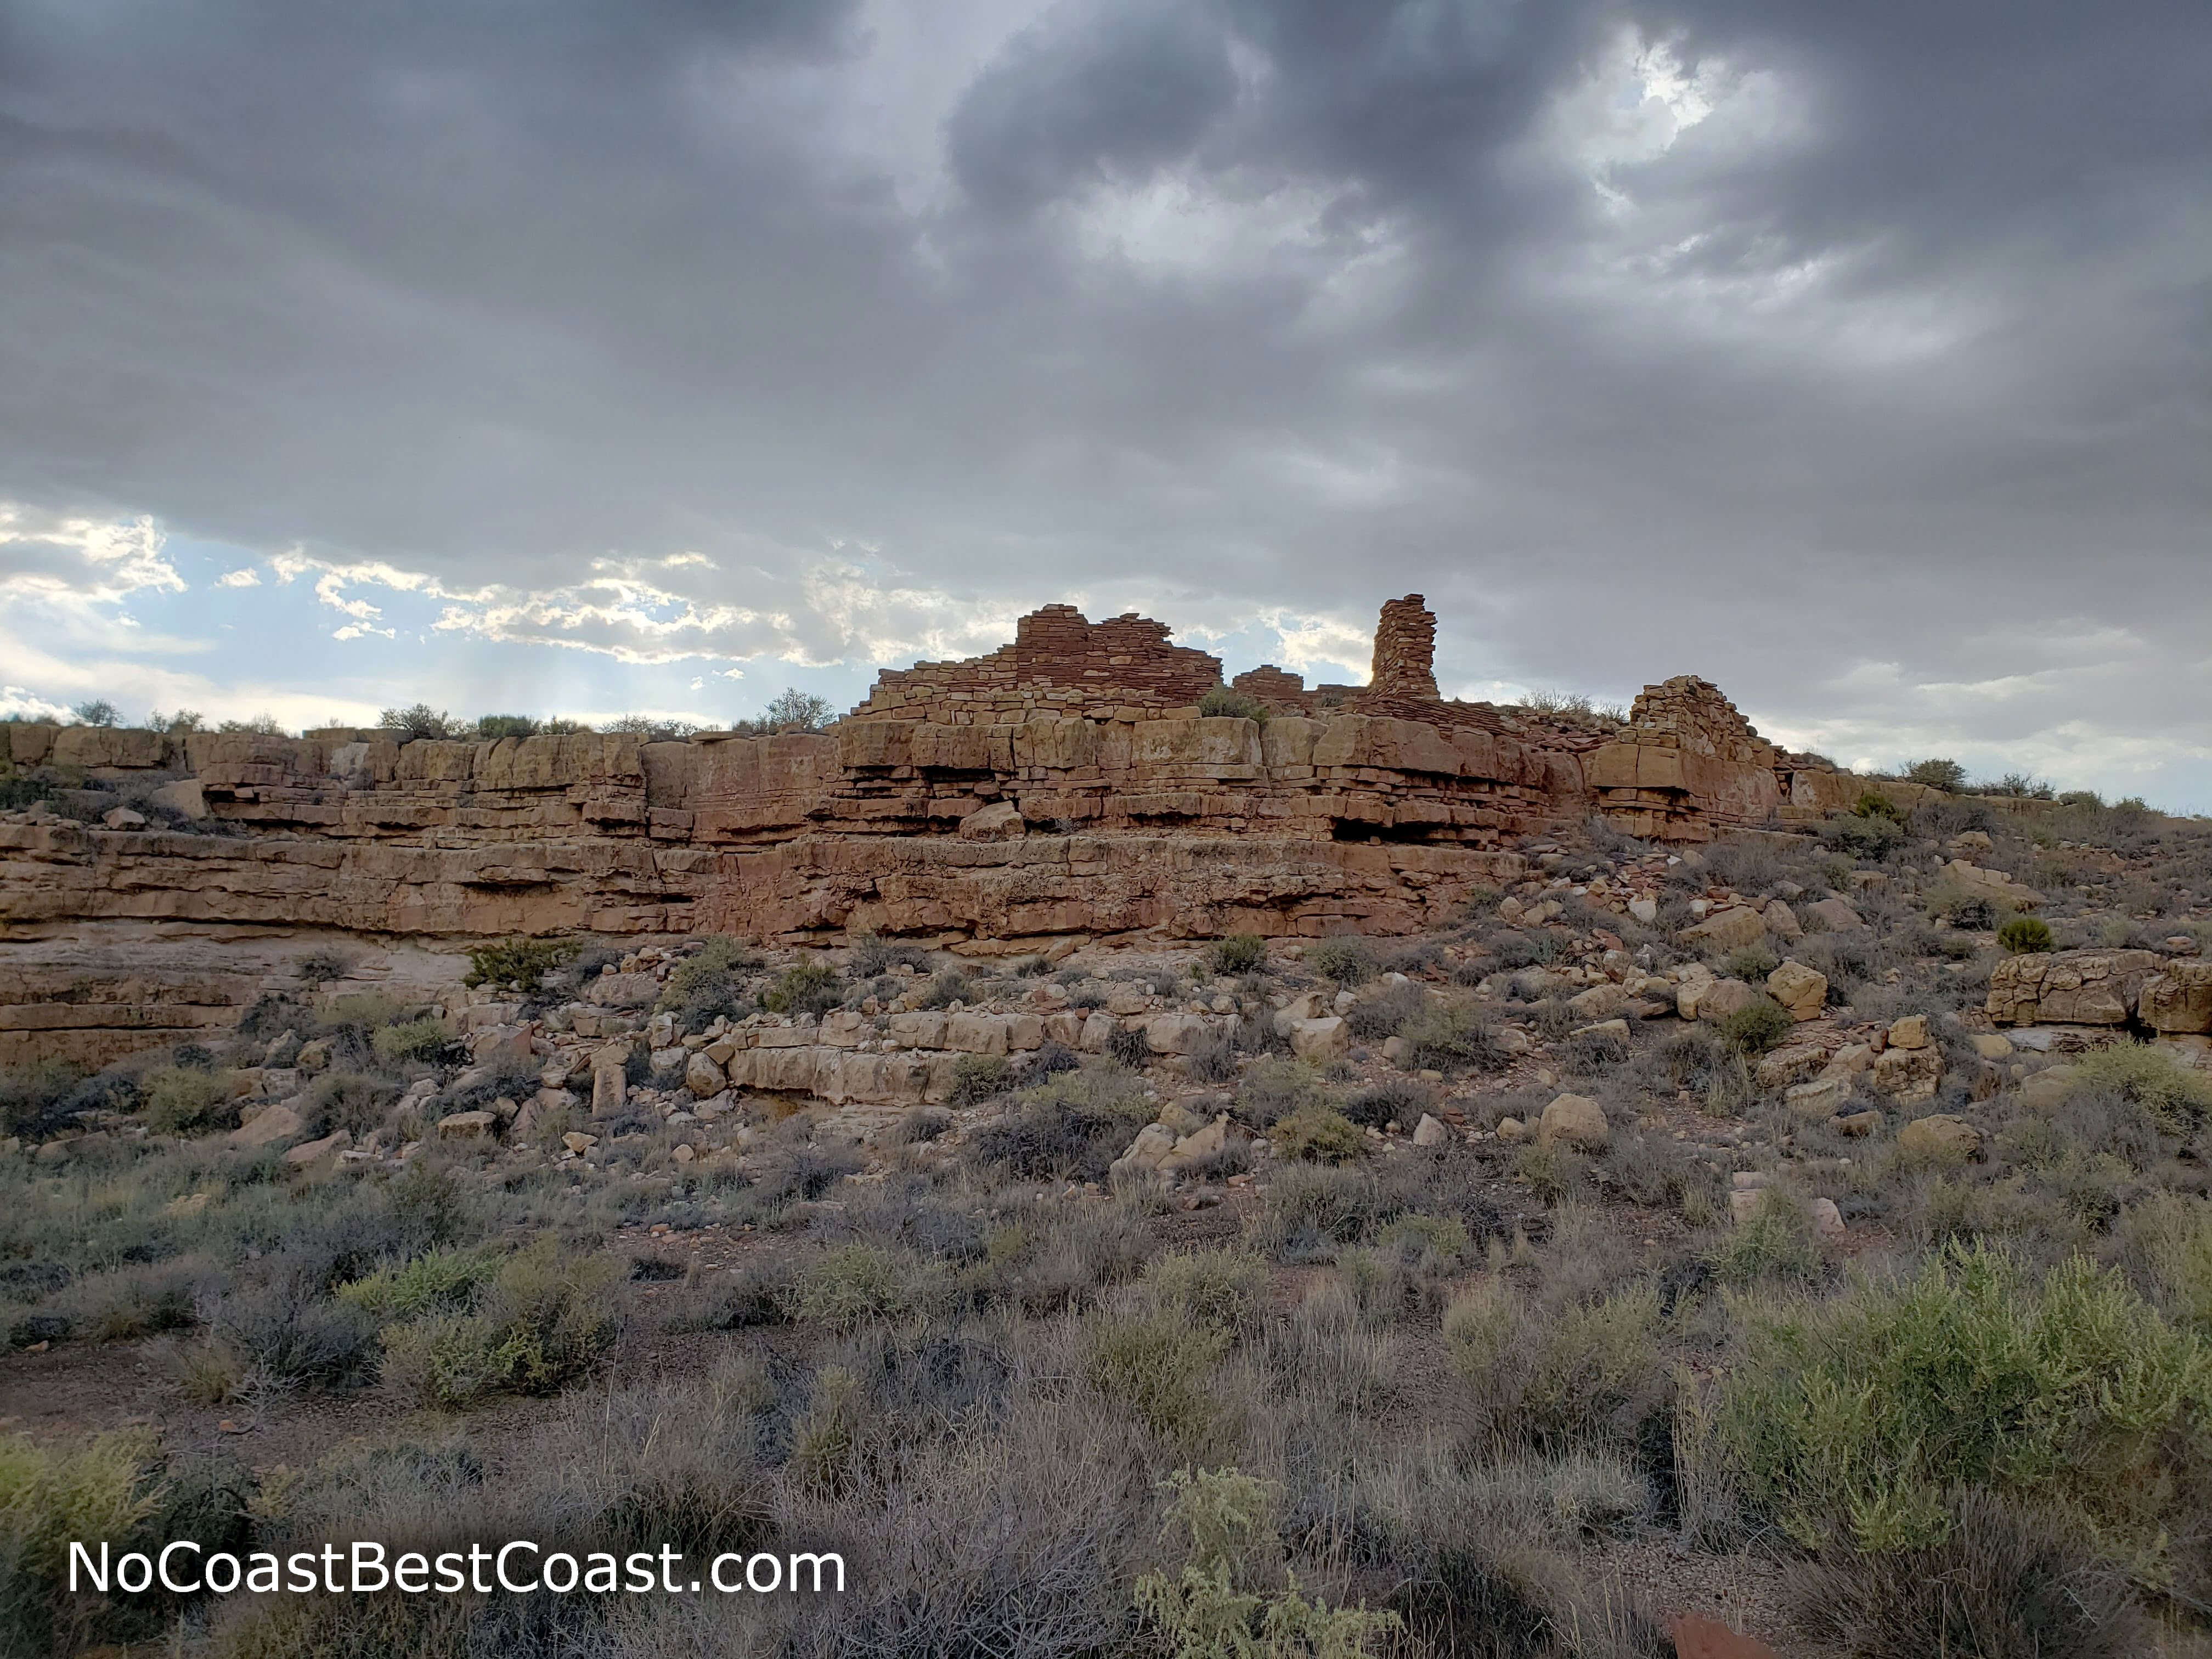 The Box Canyon Pueblos were built right against the walls of the canyon